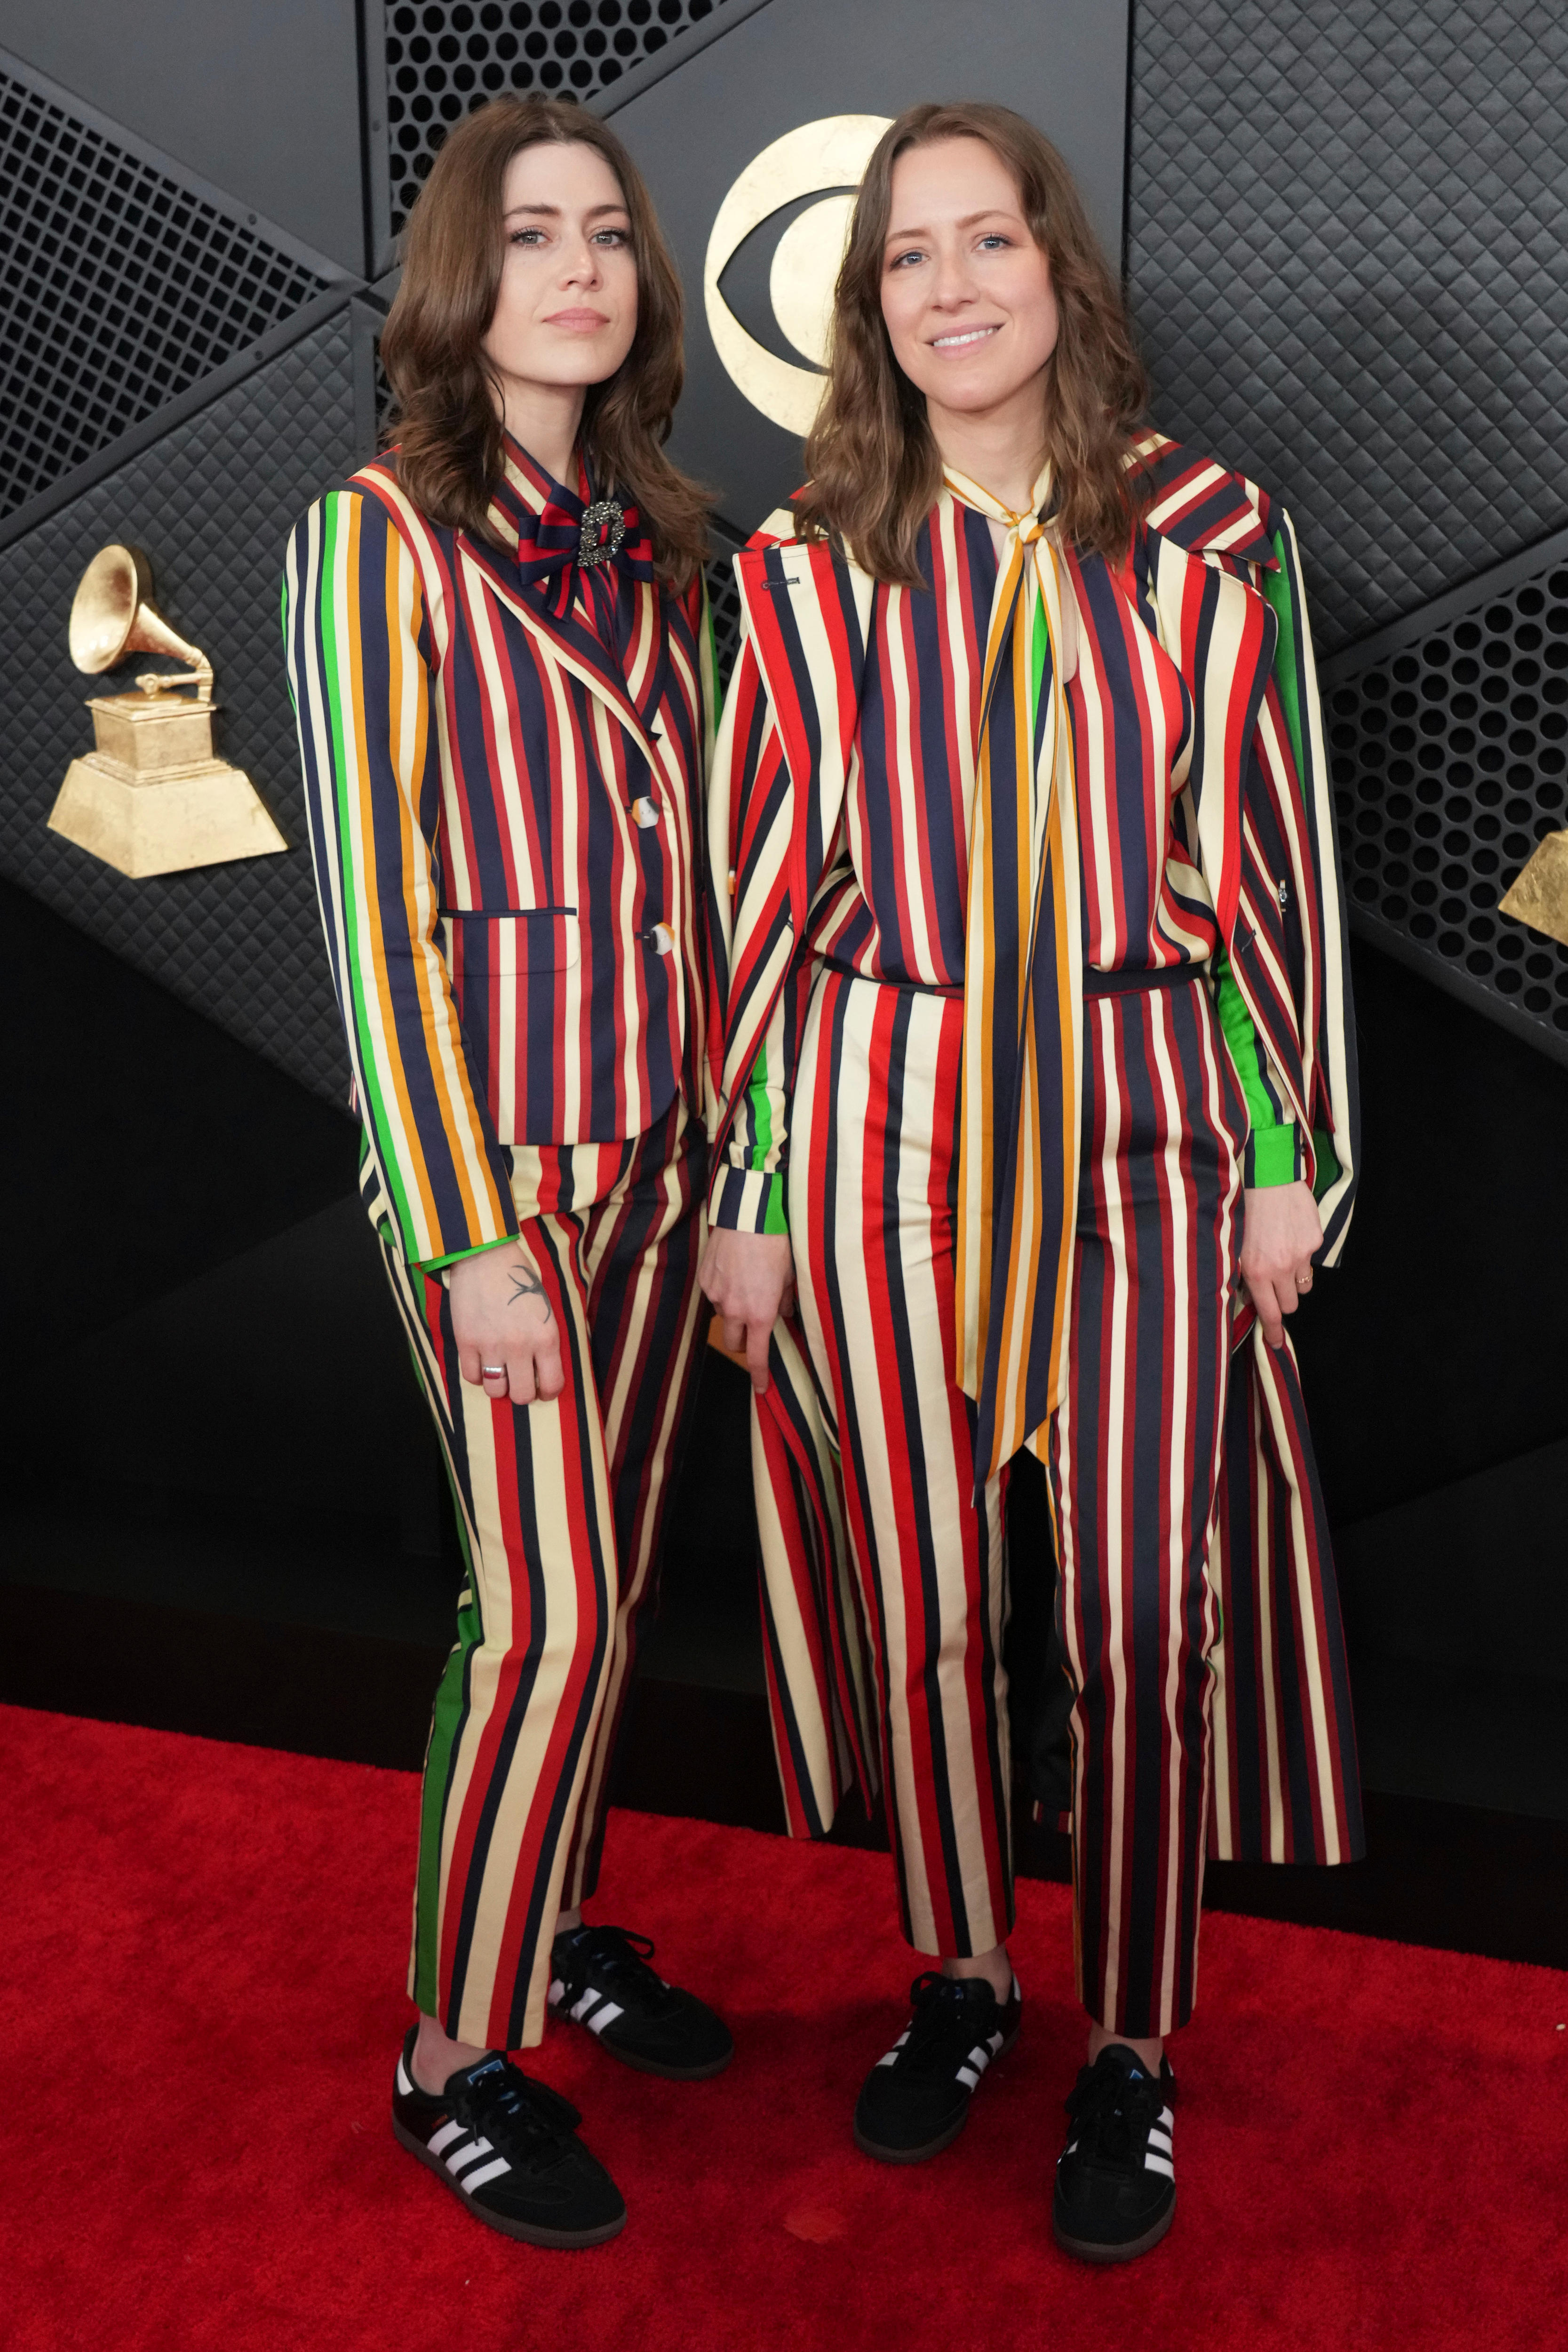 Megan and Rebecca Lovell wearing multi-coloured stripey suits